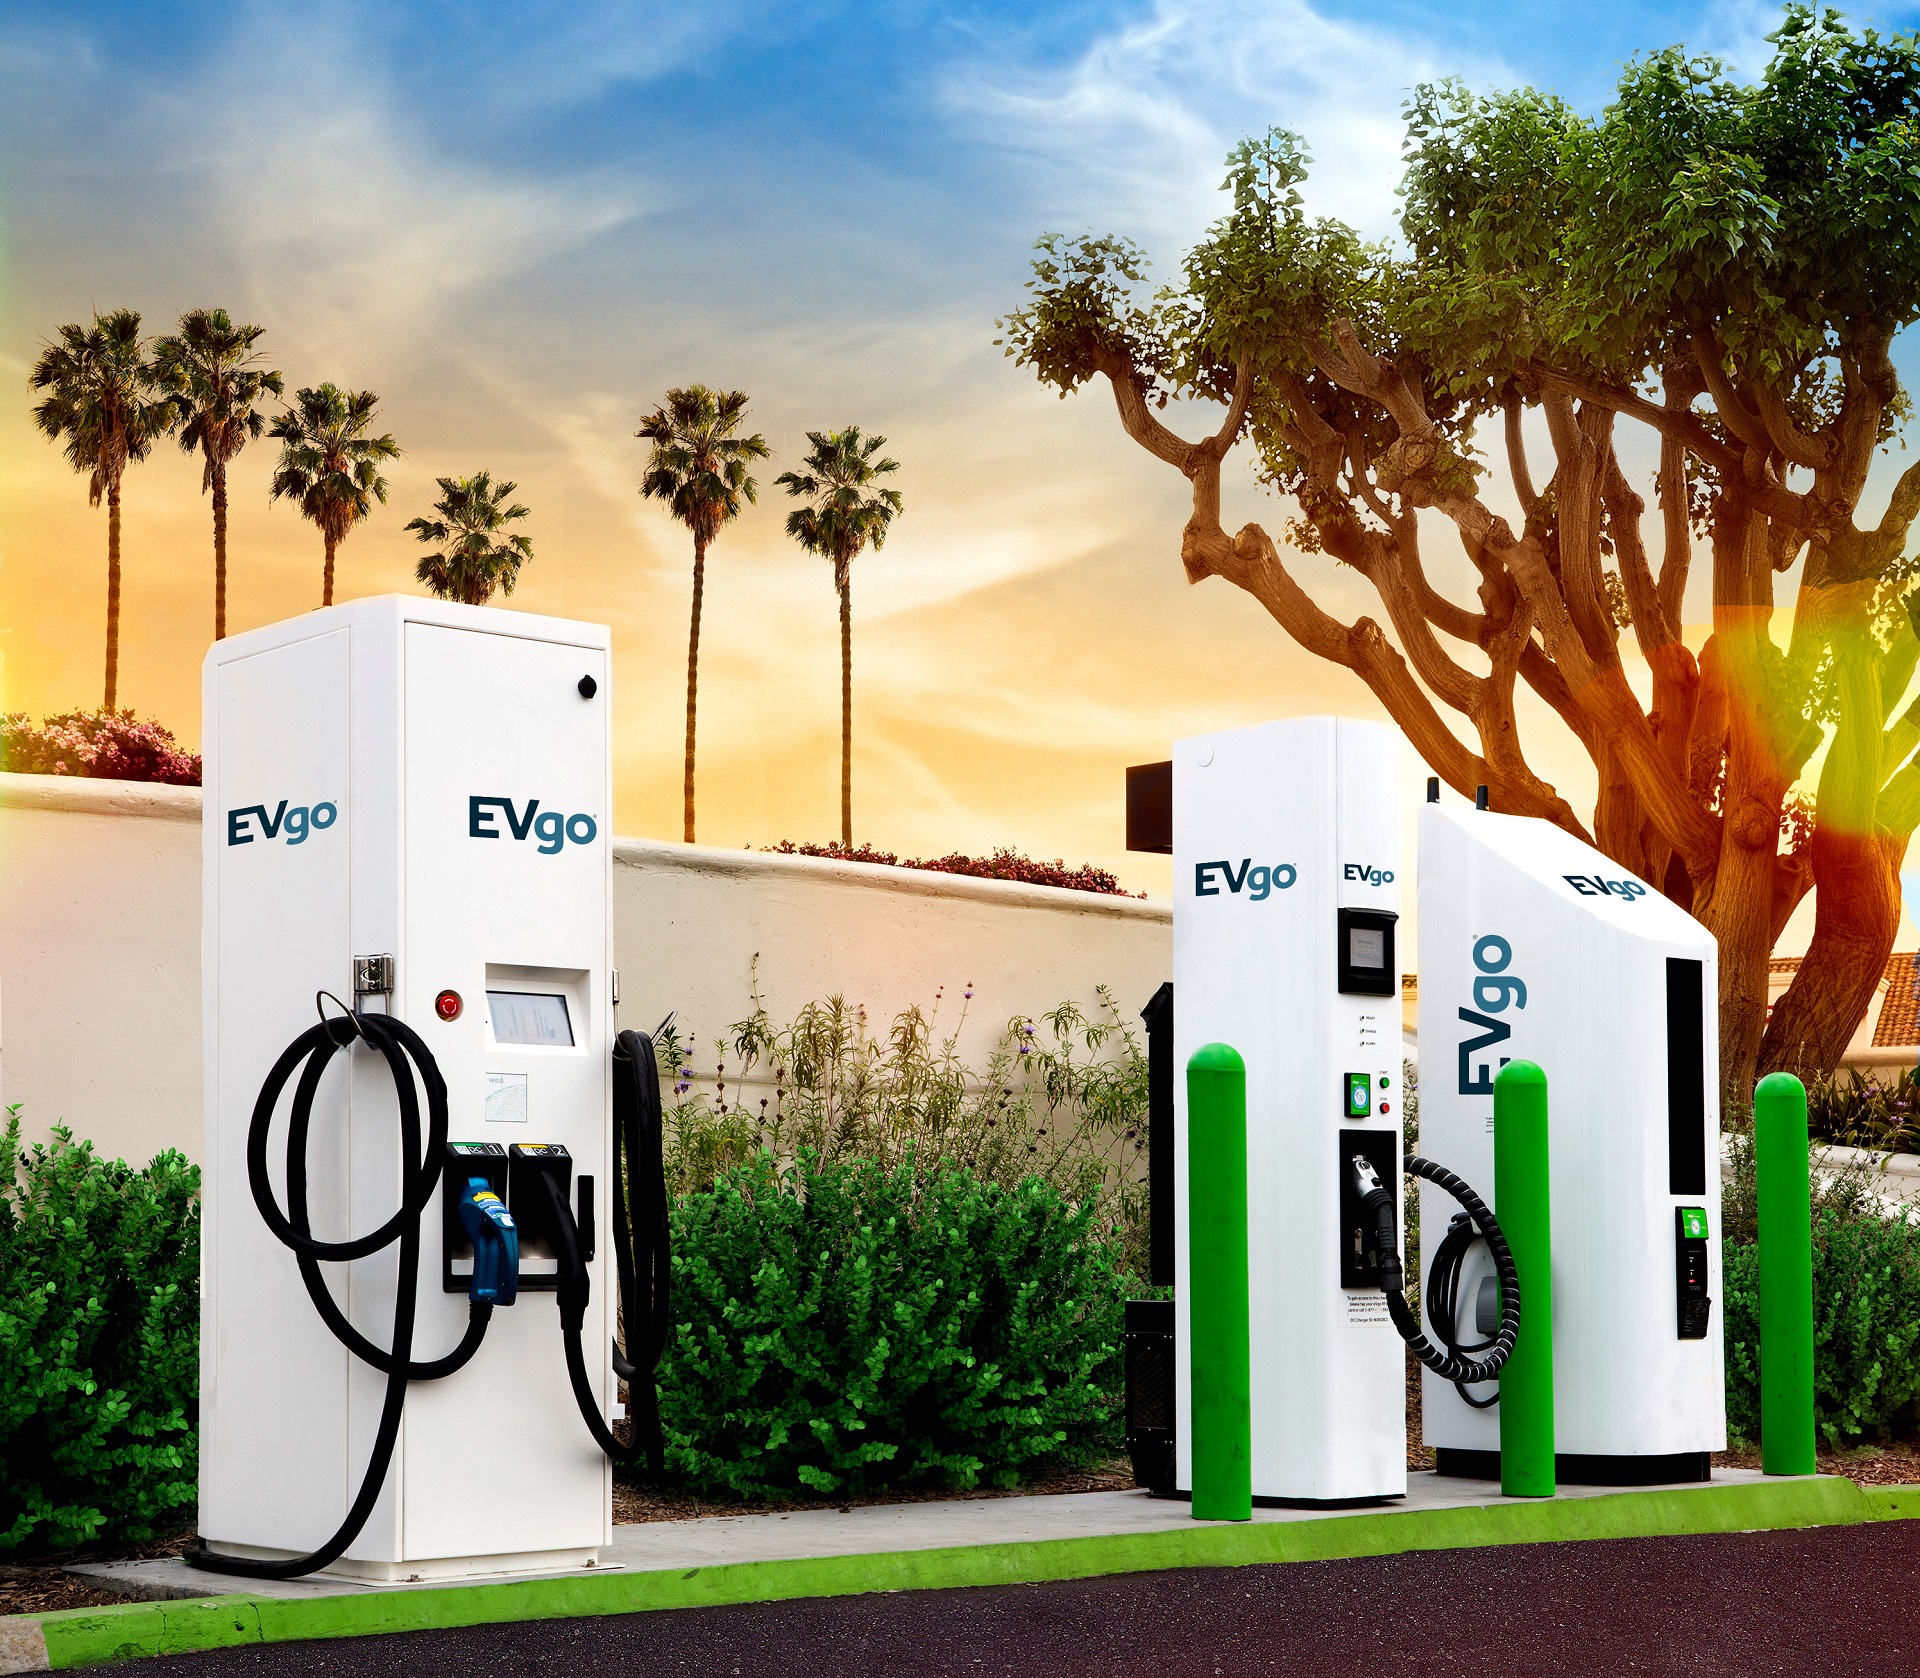 evgo plans many more tesla chargers to supplement supercharger network